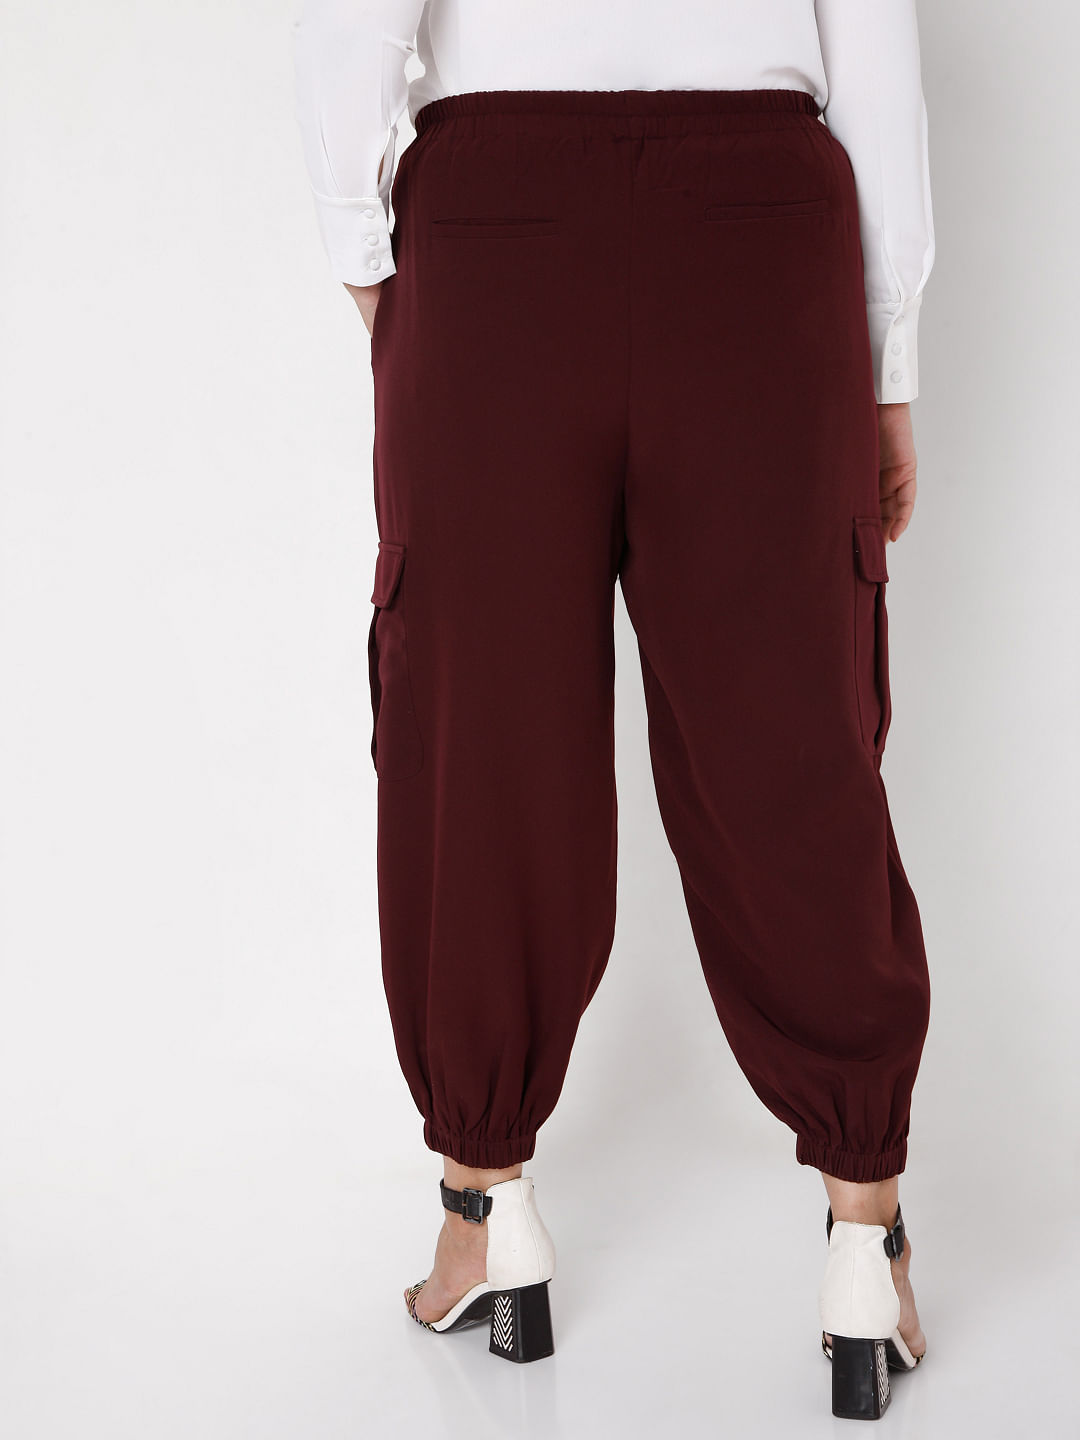 Women's maroon cargo pants with pockets - Clothing red || Maroon | WOMAN \  CLOTHING \ PANTS \ Joggers & Sweatpants WOMAN \ CLOTHING \ PANTS \ Cargo  Pants |